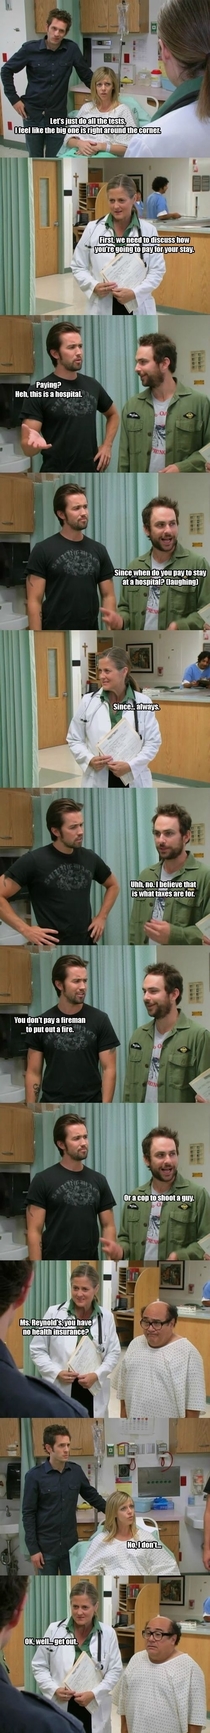 Its Always Sunny in Philadelphia on health care in America